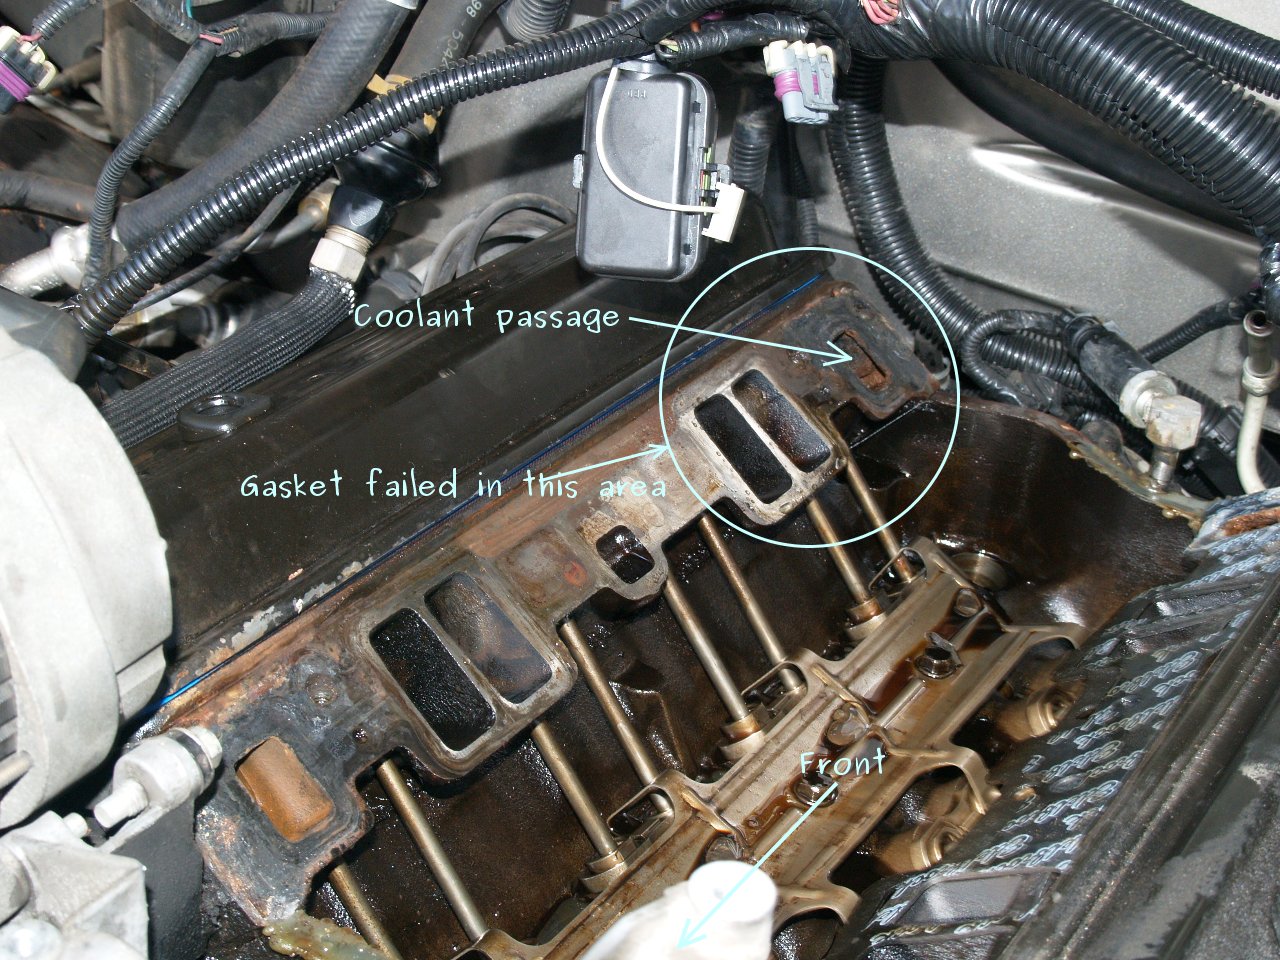 See P0357 in engine